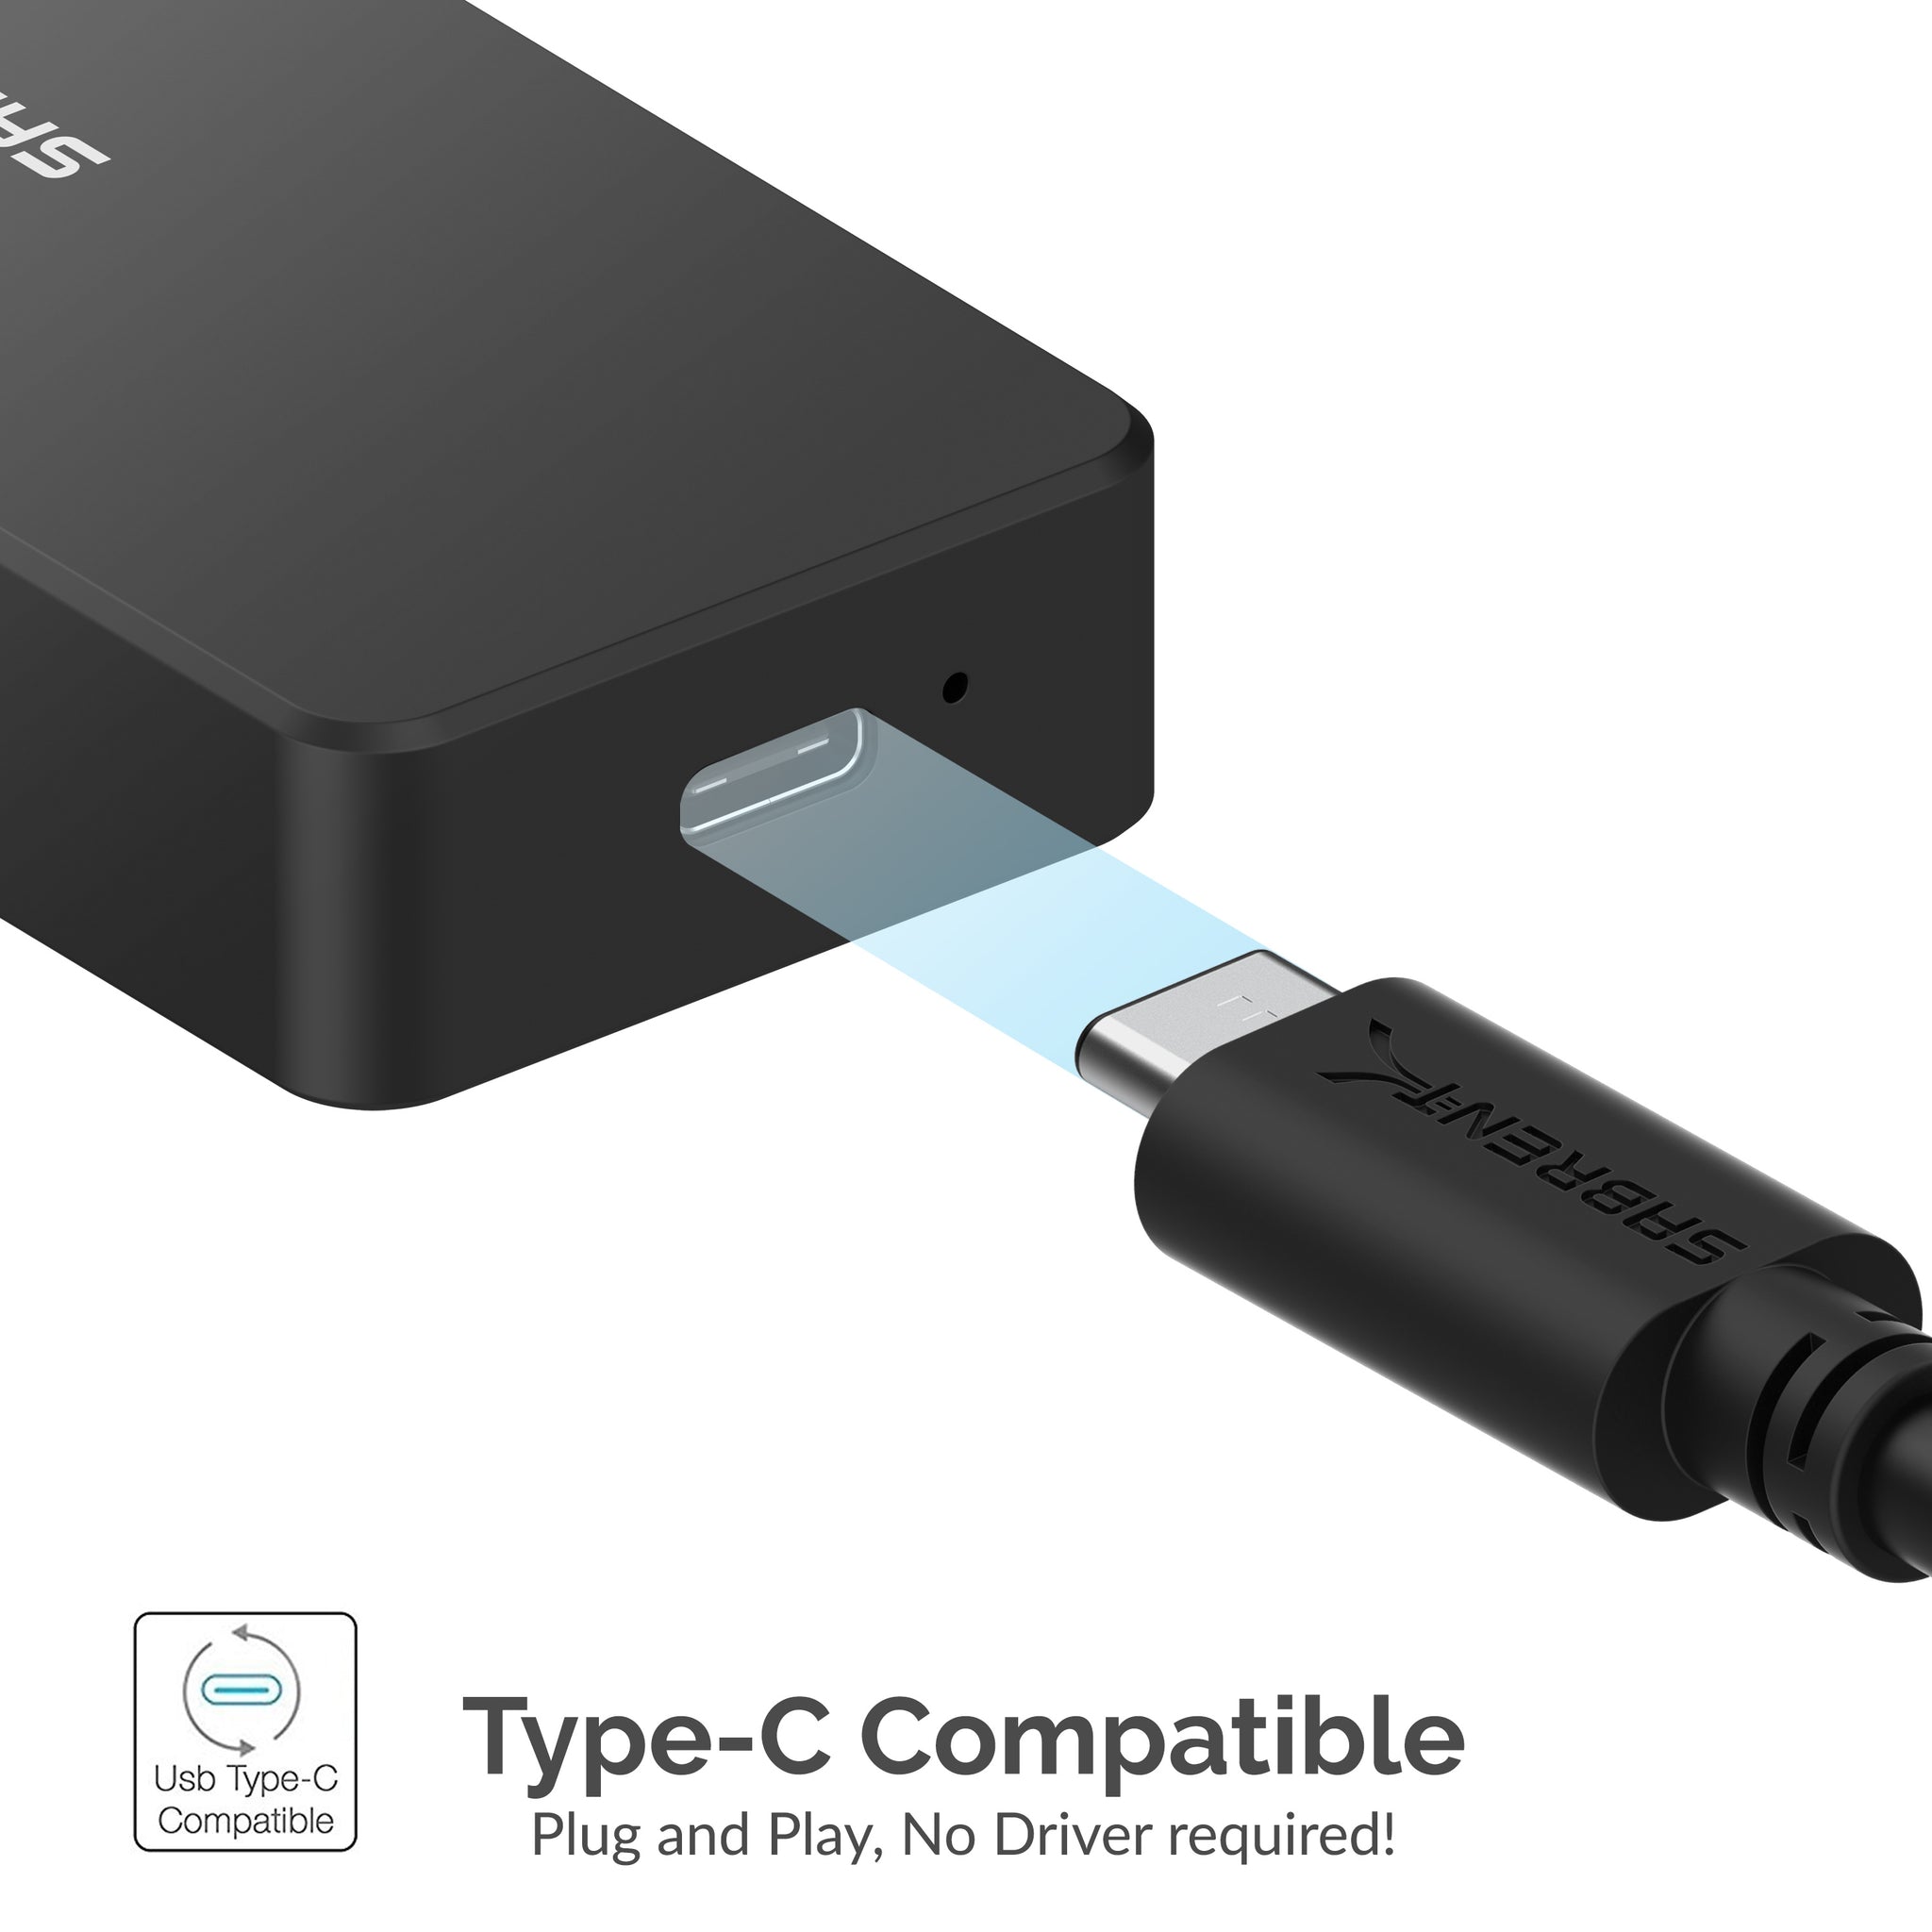 USB 3.2 Type-C Tool-Free Enclosure for M.2 PCIe NVMe and SATA SSDs - Sabrent